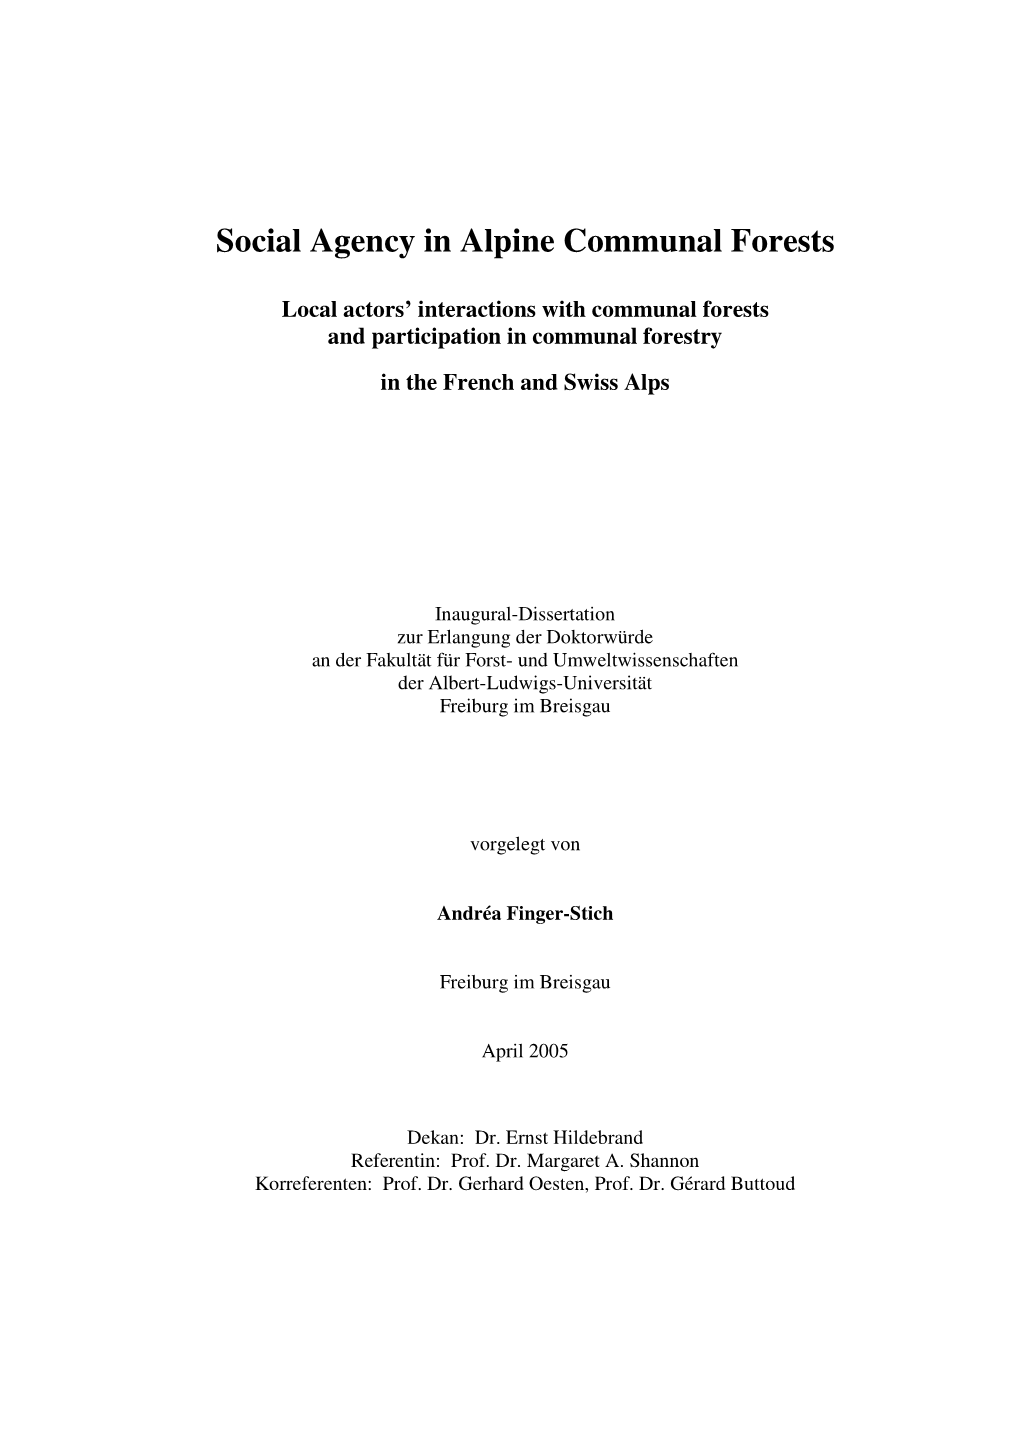 Social Agency in Alpine Communal Forests